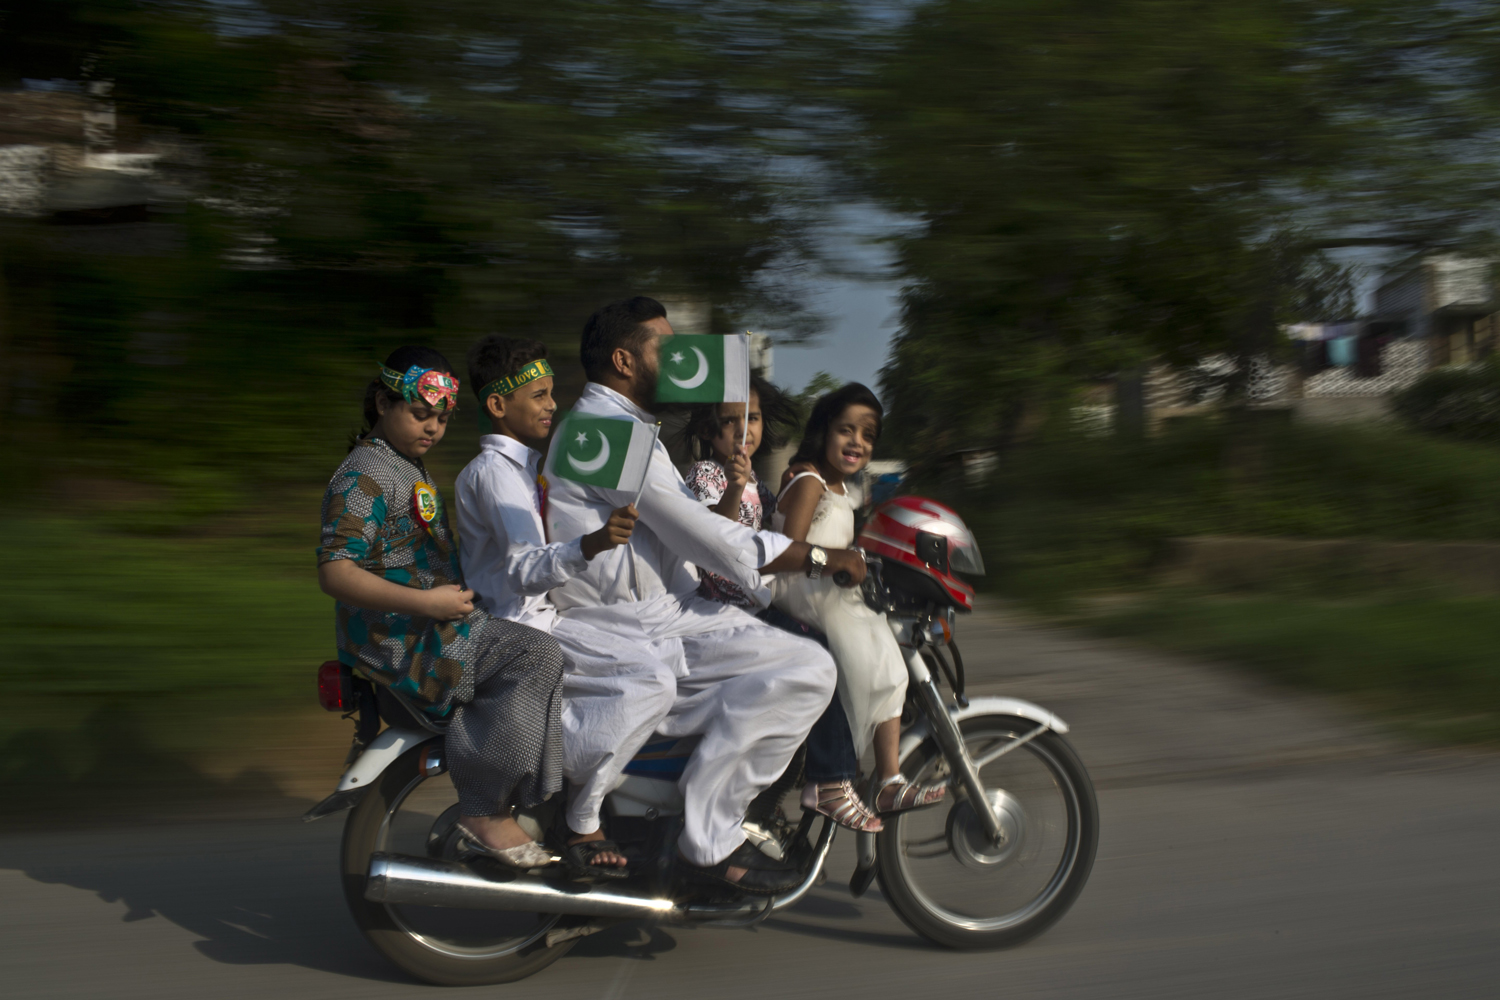 Aug. 14, 2014. A Pakistani father and his four children, ride a motorcycle along a road, and waving their national flag, as they celebrate the 68th Independence Day, in Islamabad, Pakistan.